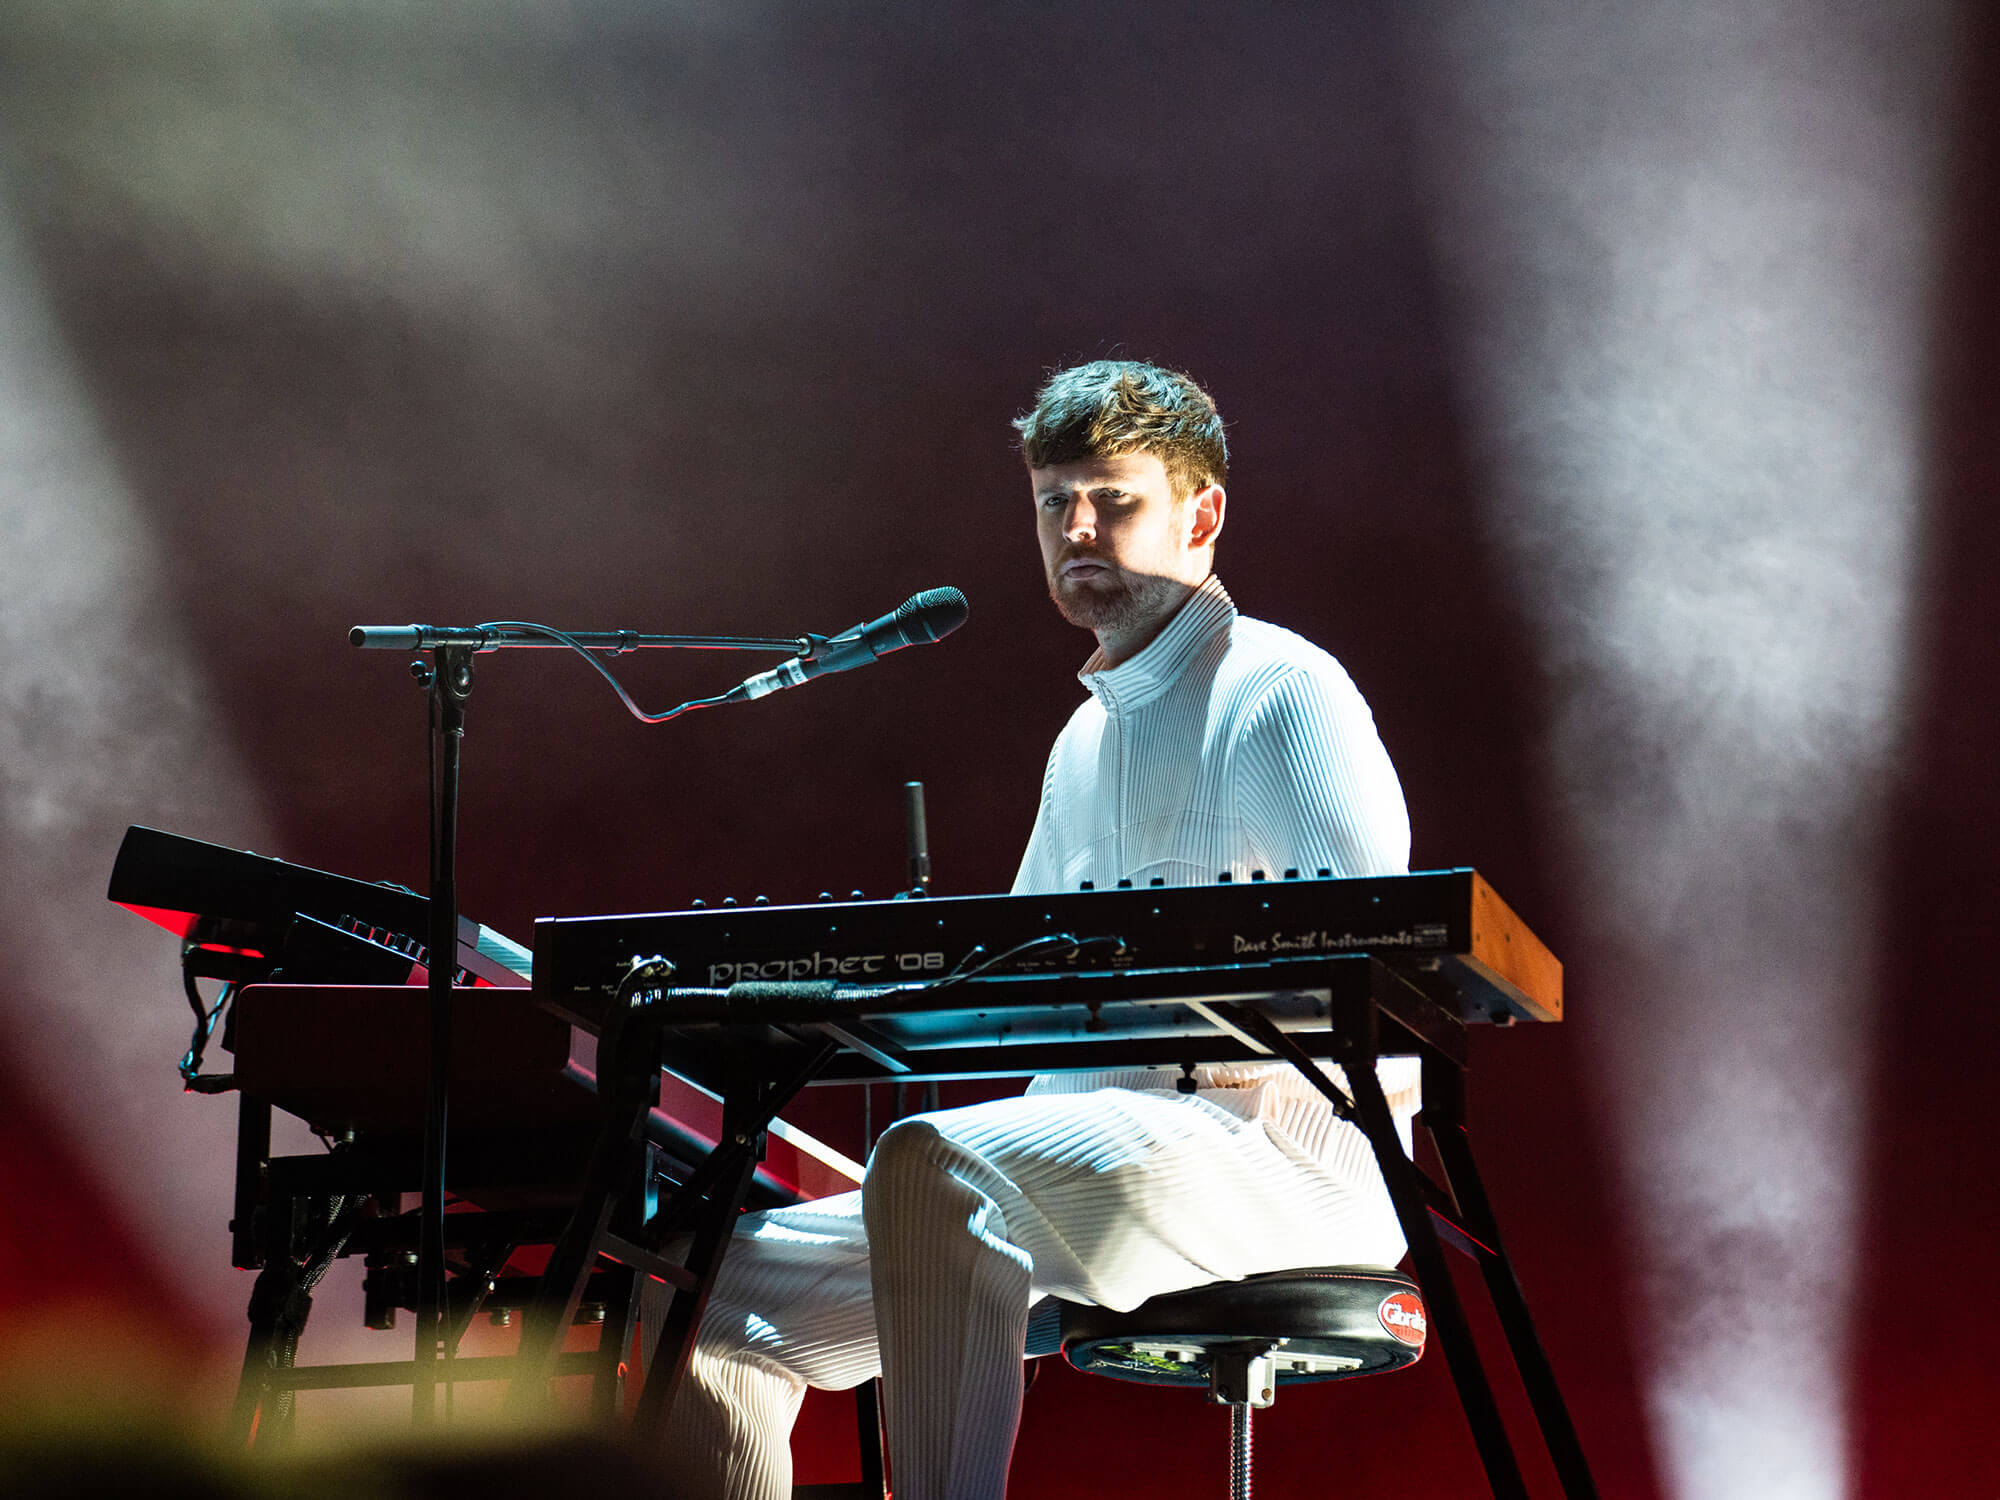 James Blake at All Points East, shot by Lorn Thomson